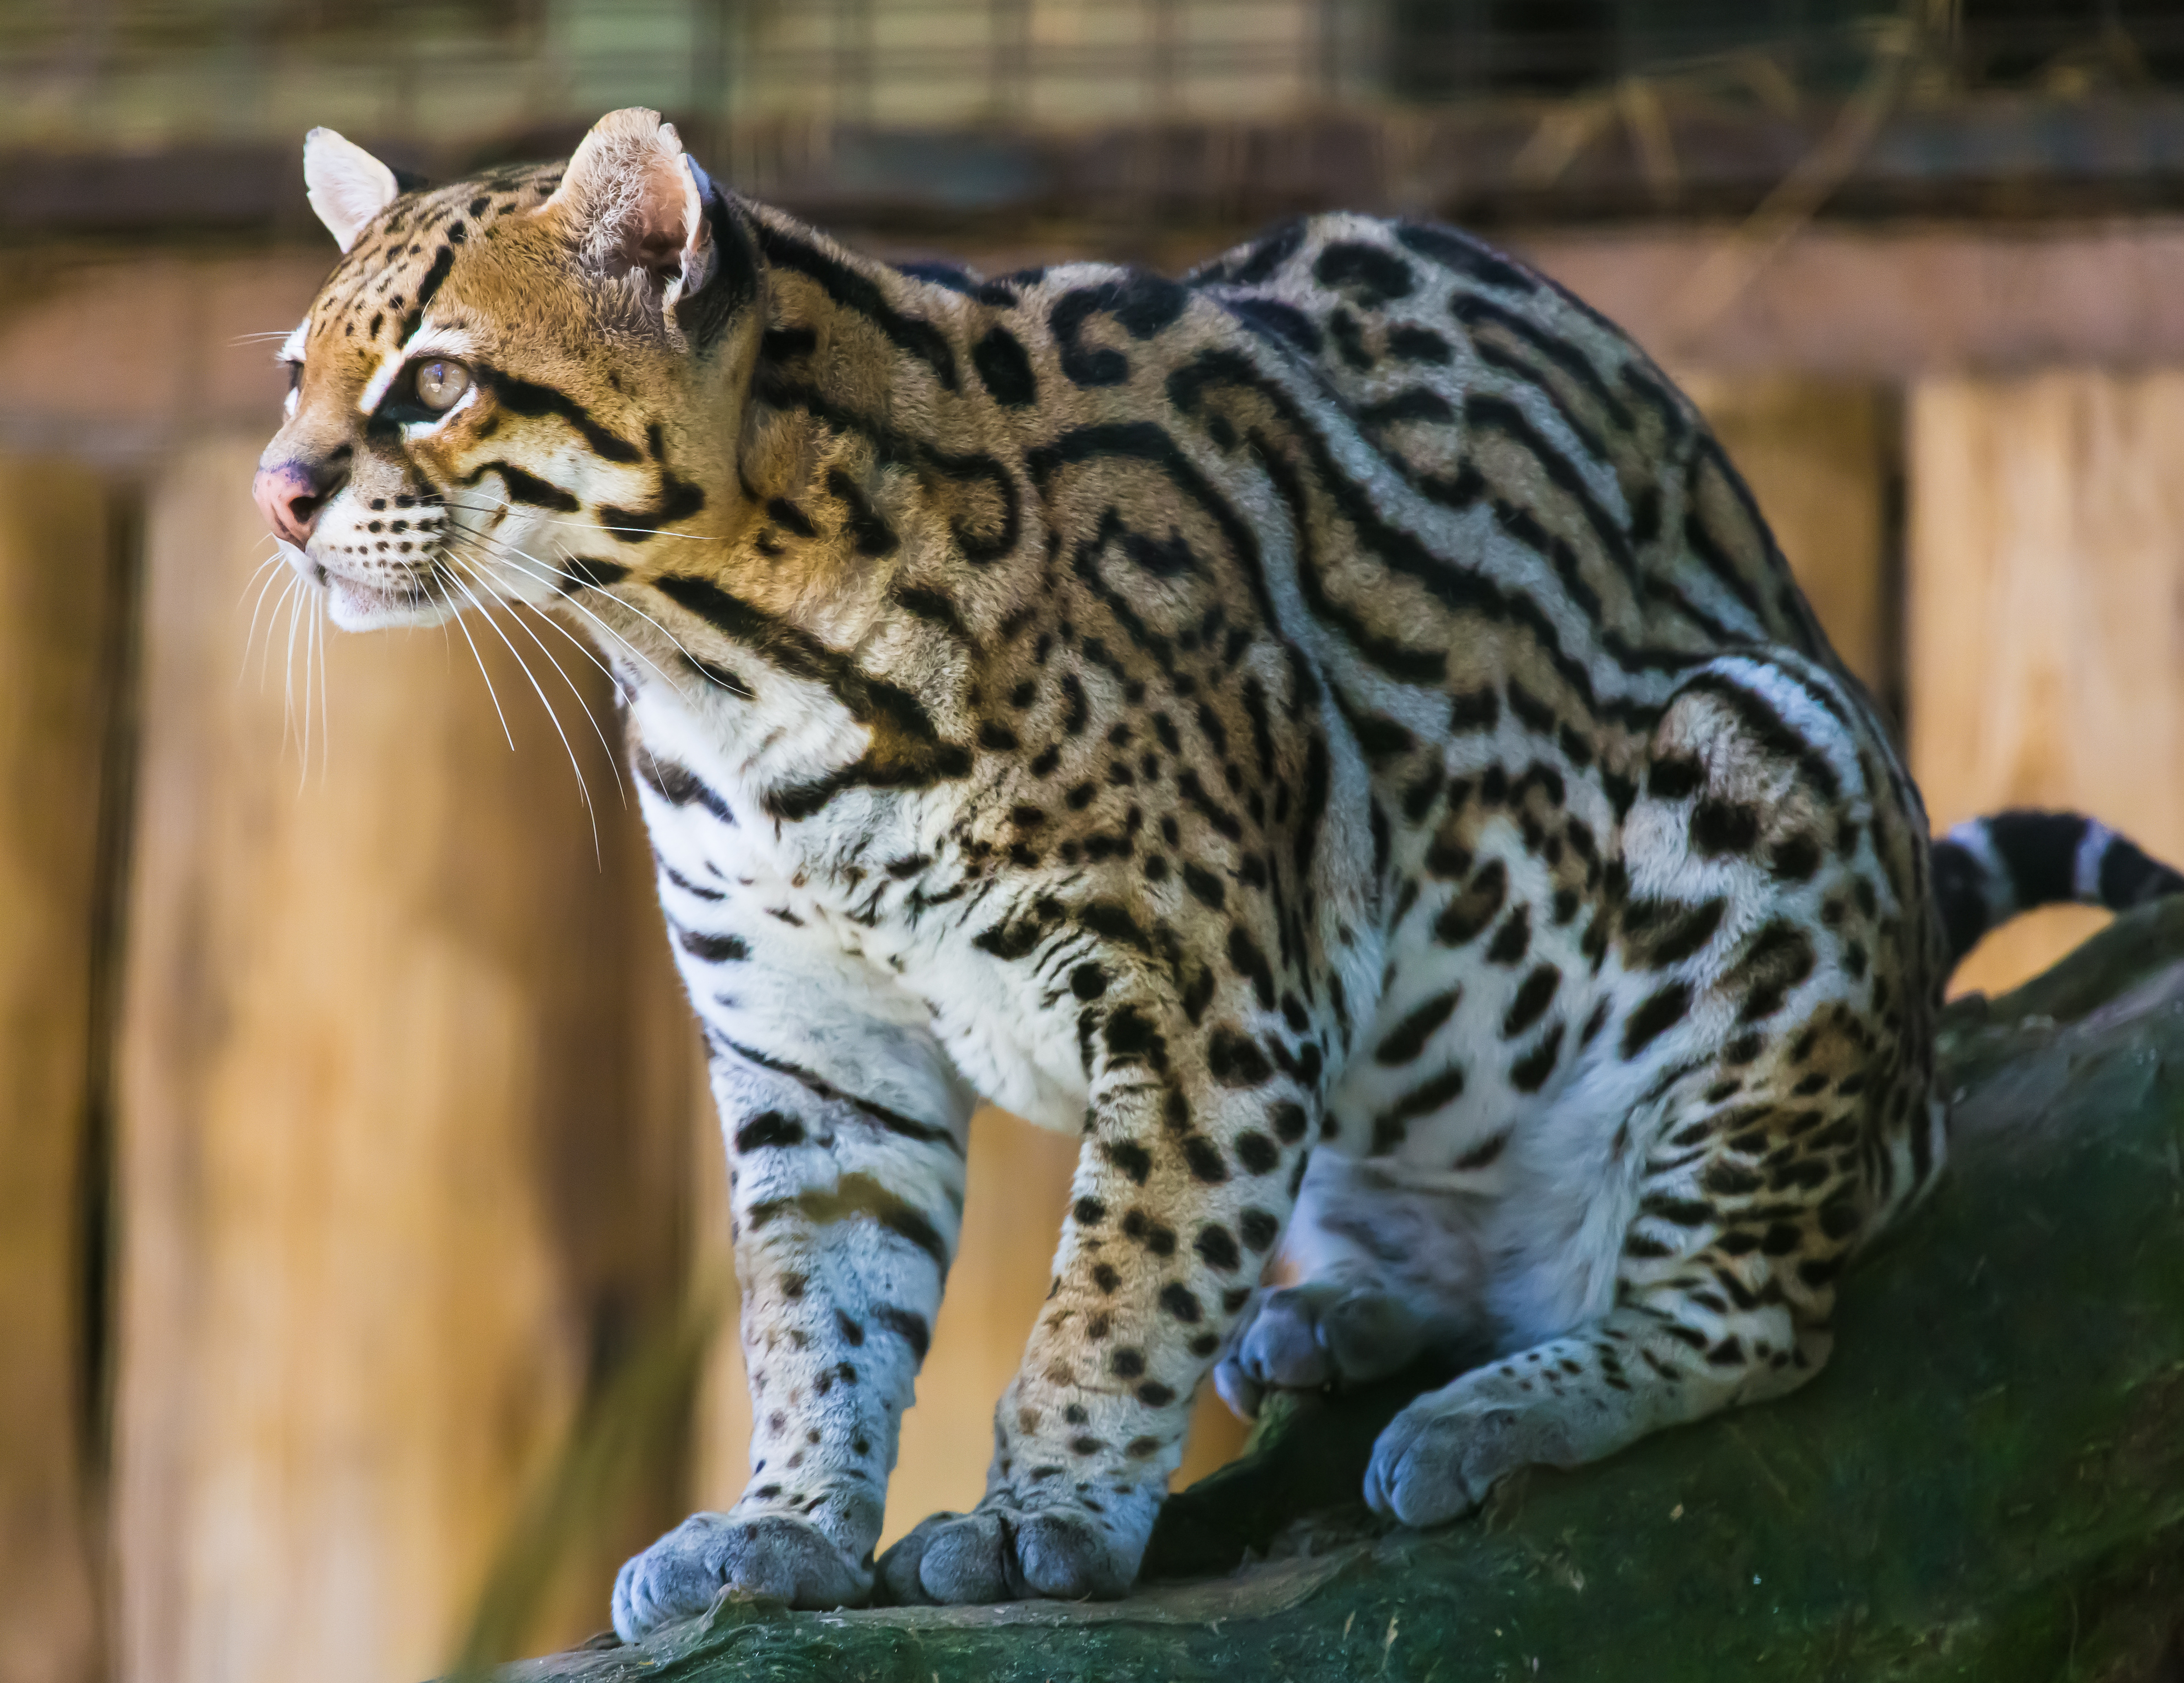 How many stripes does an ocelot have?